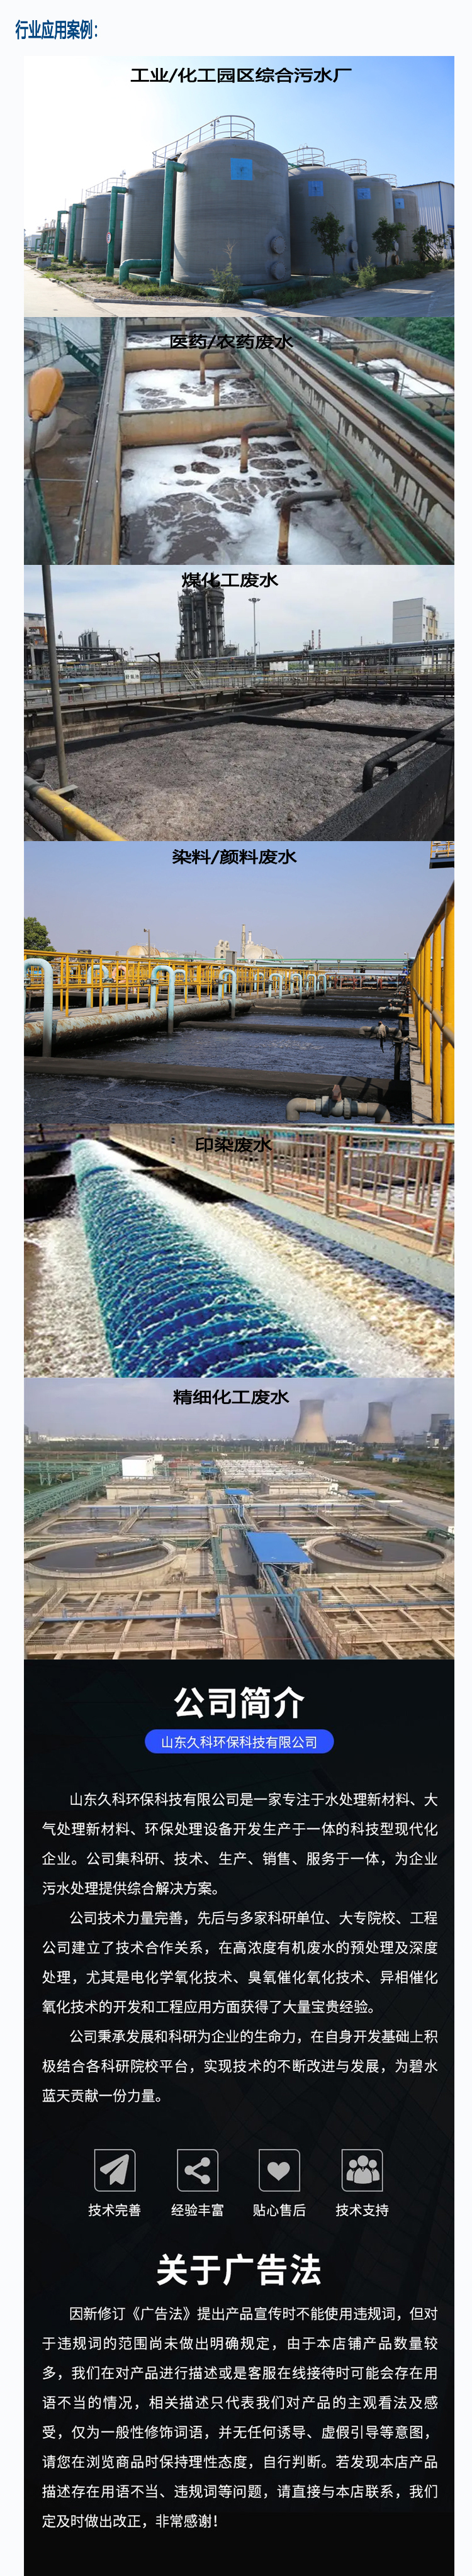 Animal source feed wastewater blood treatment equipment Jiuke has over ten years of experience in industrial wastewater treatment